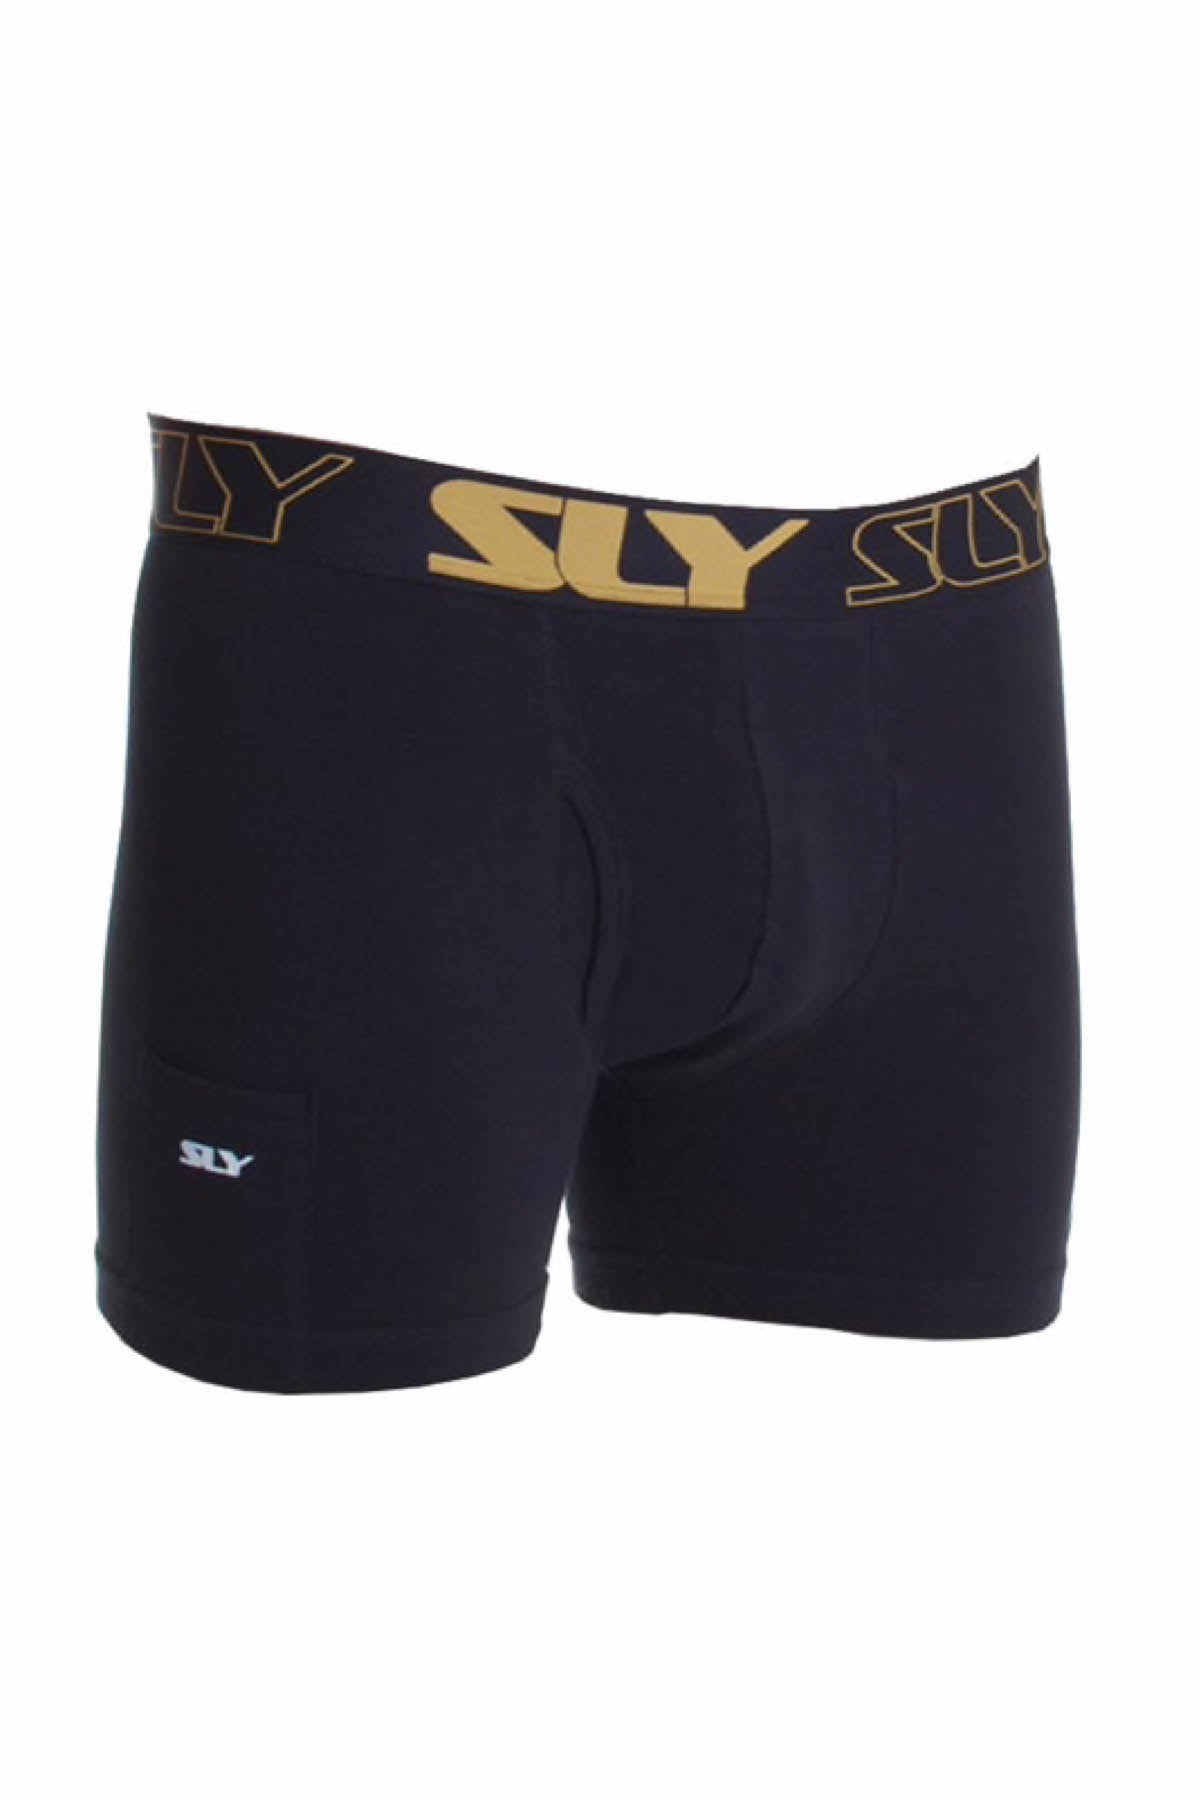 Sly Black & Gold Solid Boxer Trunk